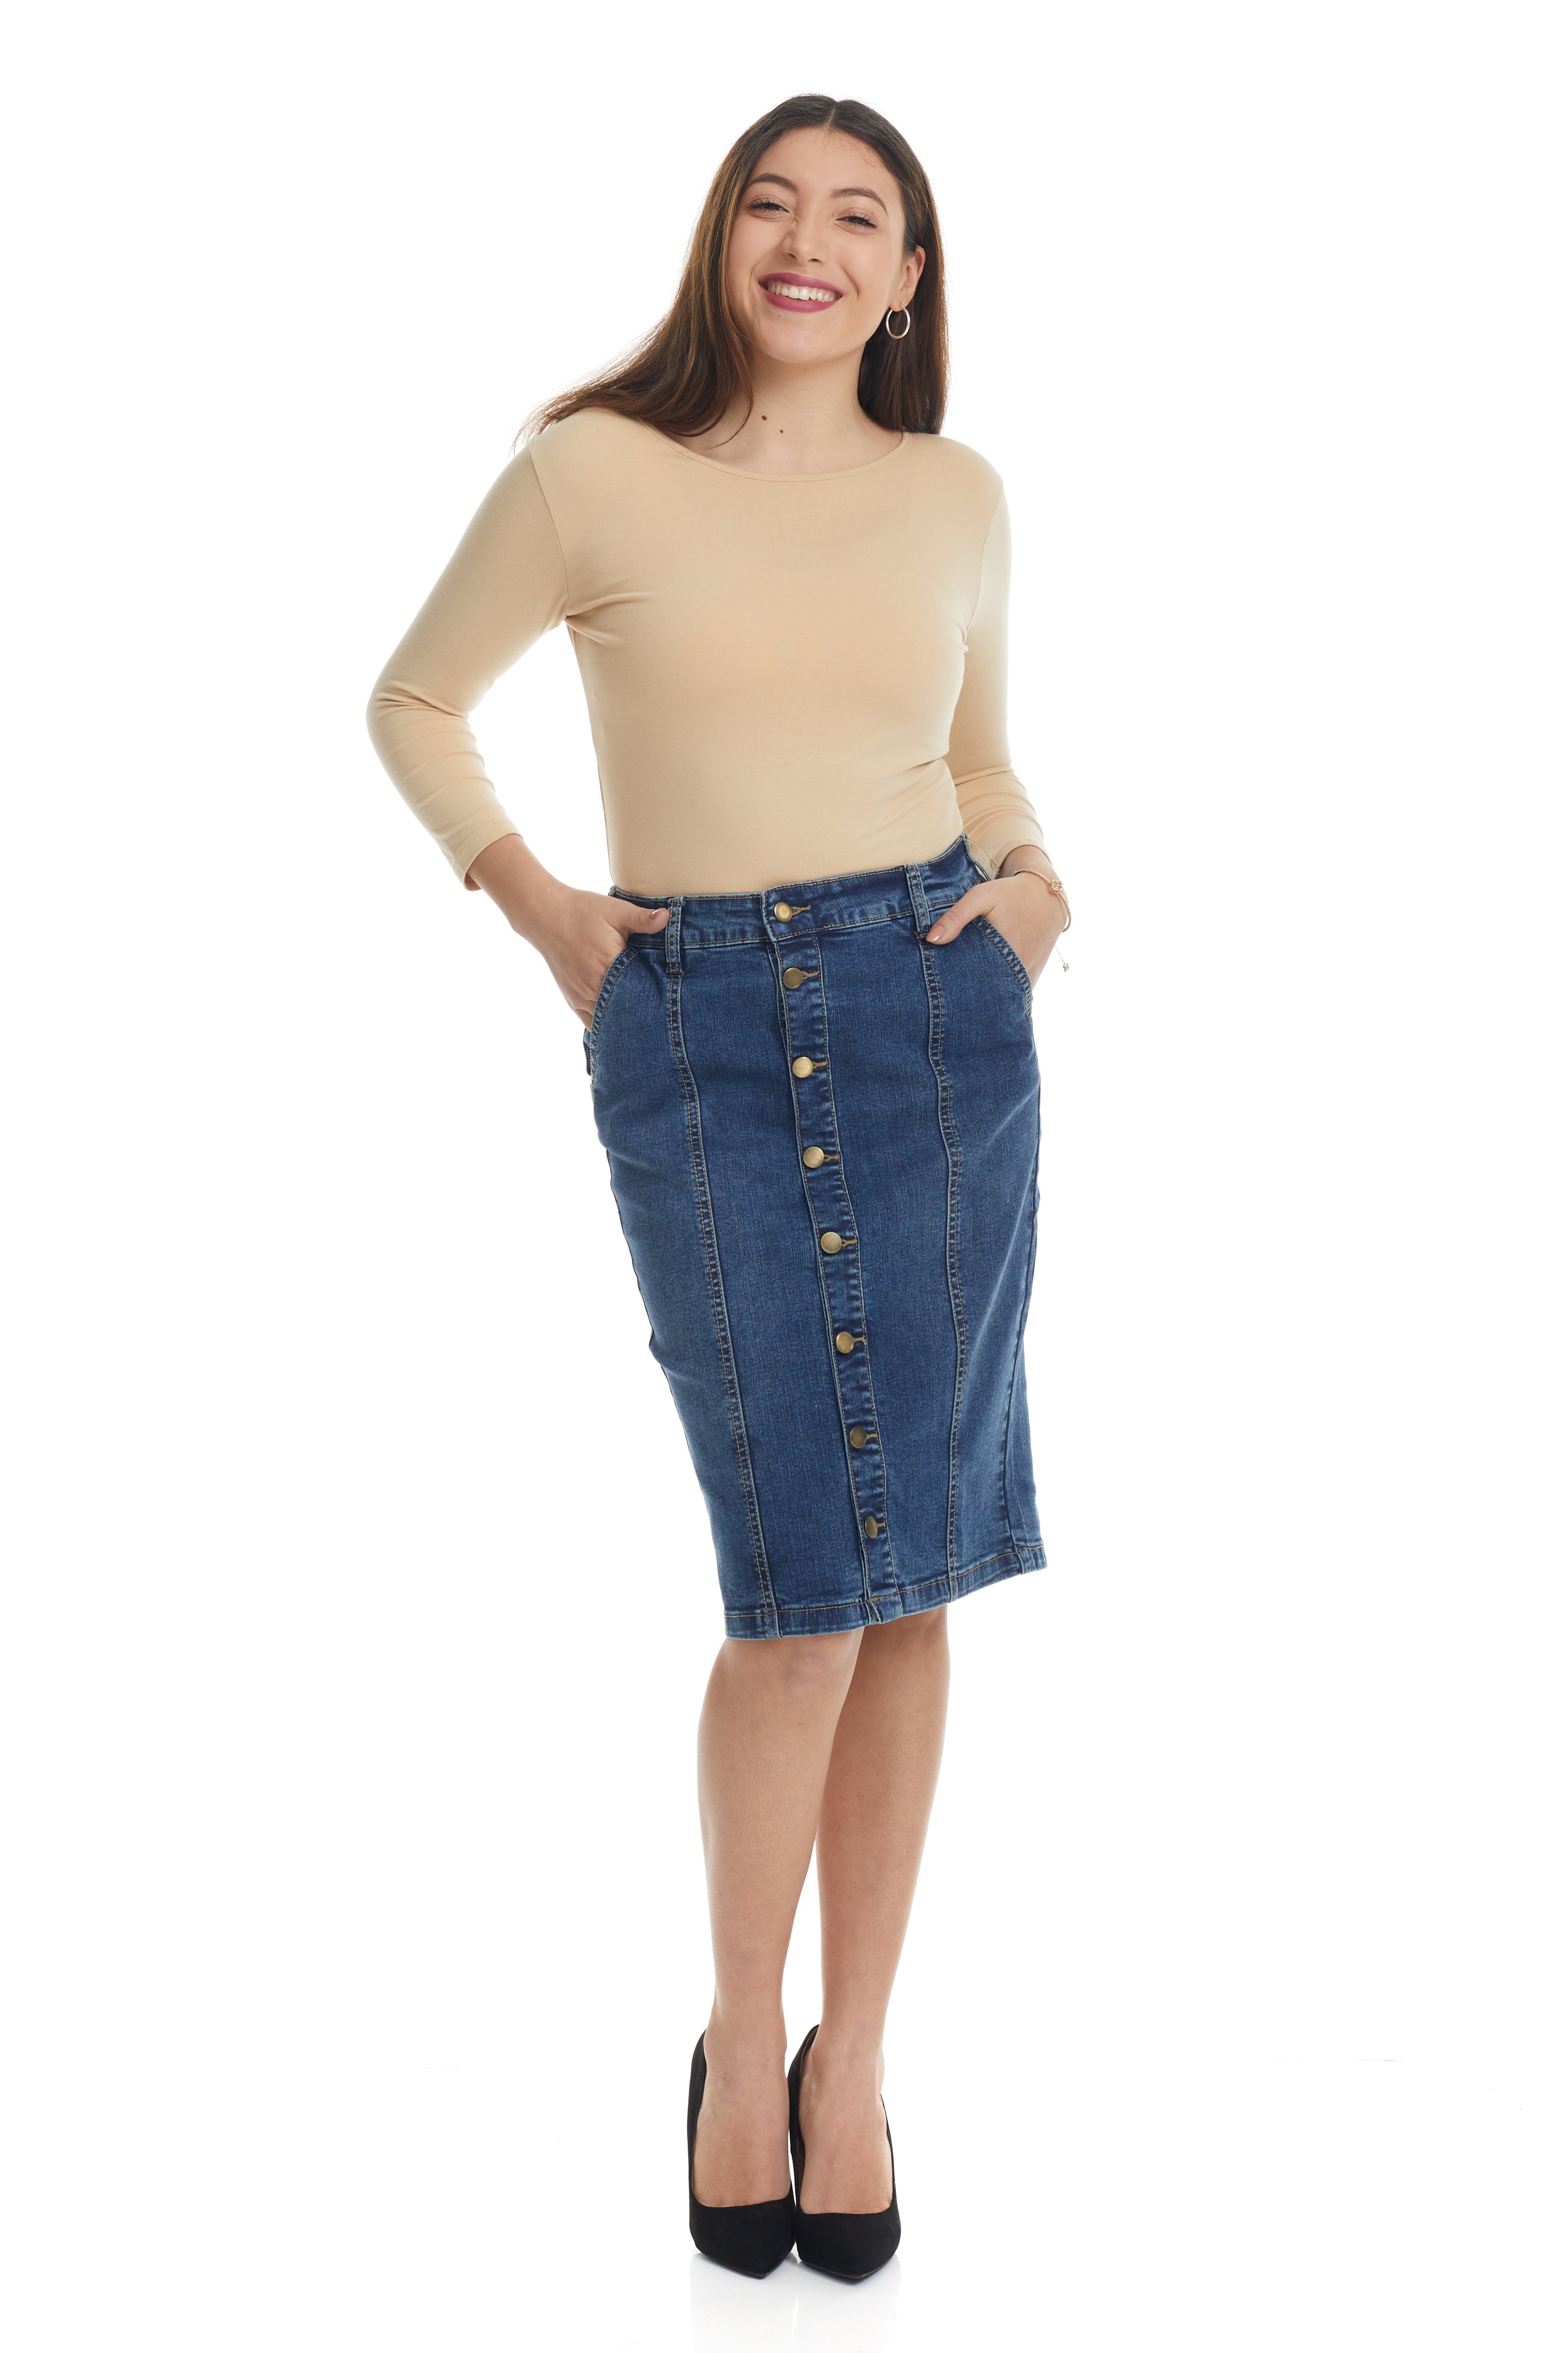 Buttons & Style Light Wash Jean Skirt – The King's Daughter Boutique